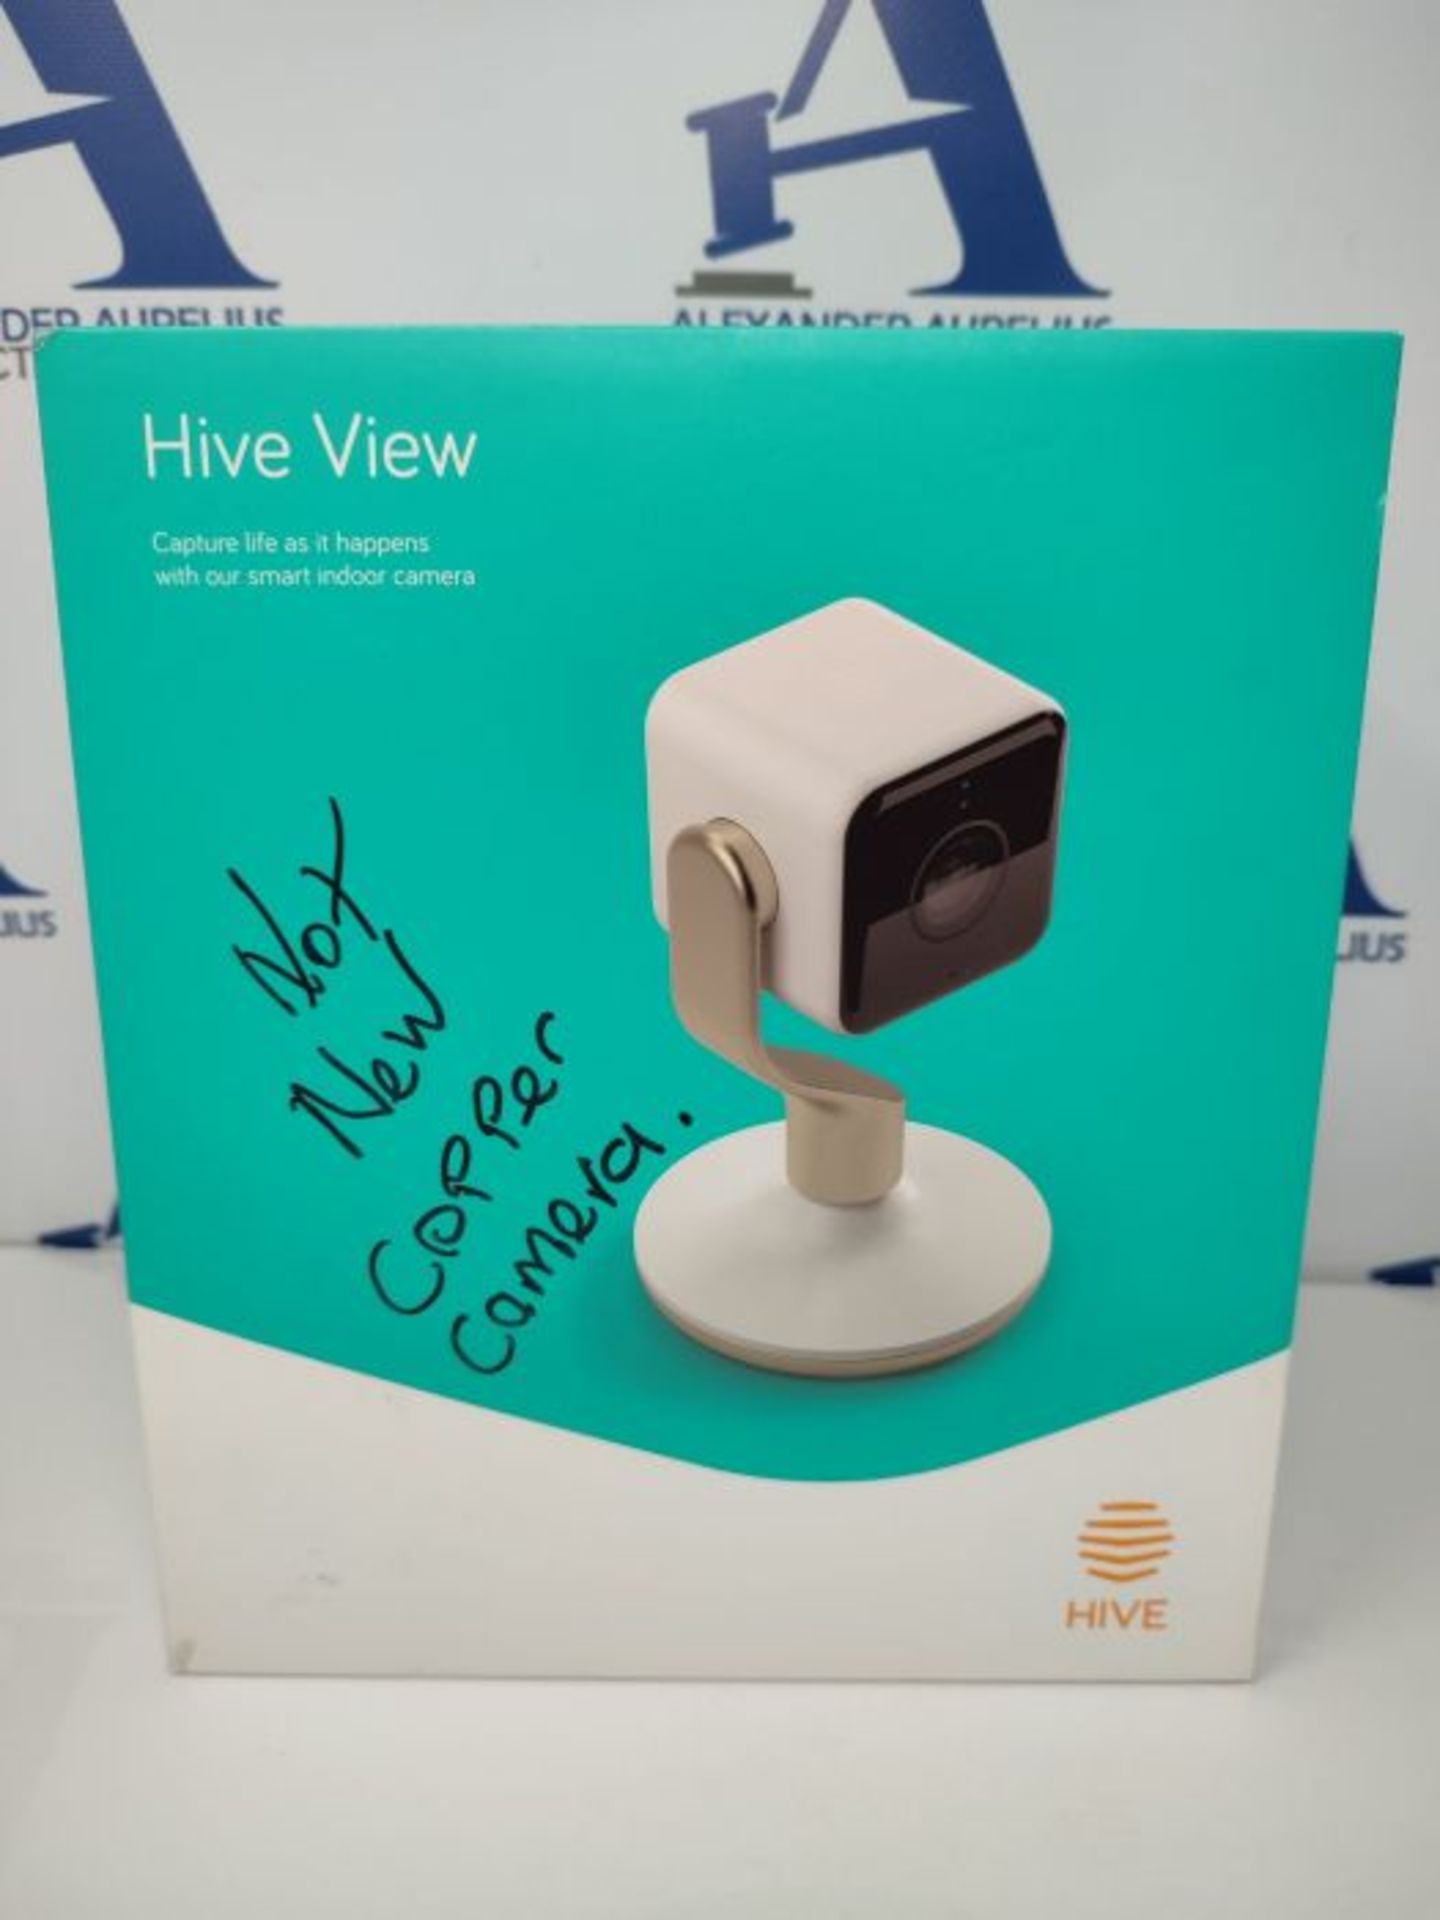 RRP£161.00 Hive UK7001720 View Indoor Security Camera - White & Champagne Gold, 14.5 cm*8.8 cm*8. - Image 2 of 3